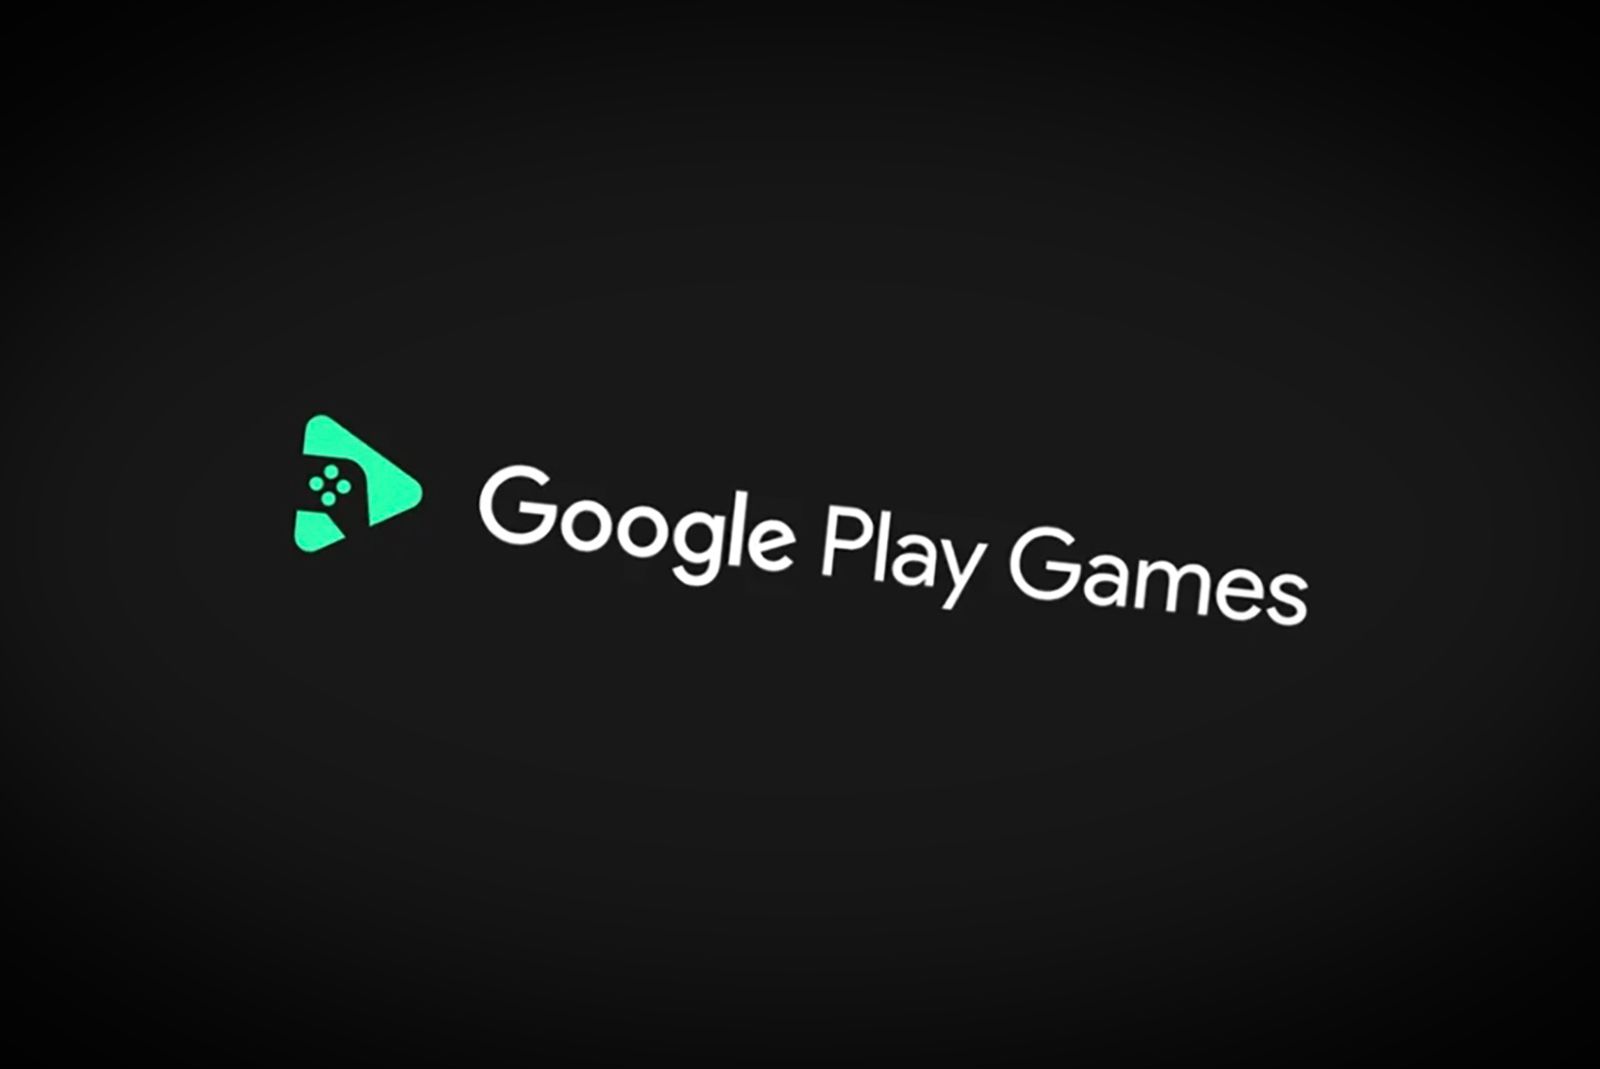 Android games will come to Windows PCs in 2022 via new Play Games app photo 1